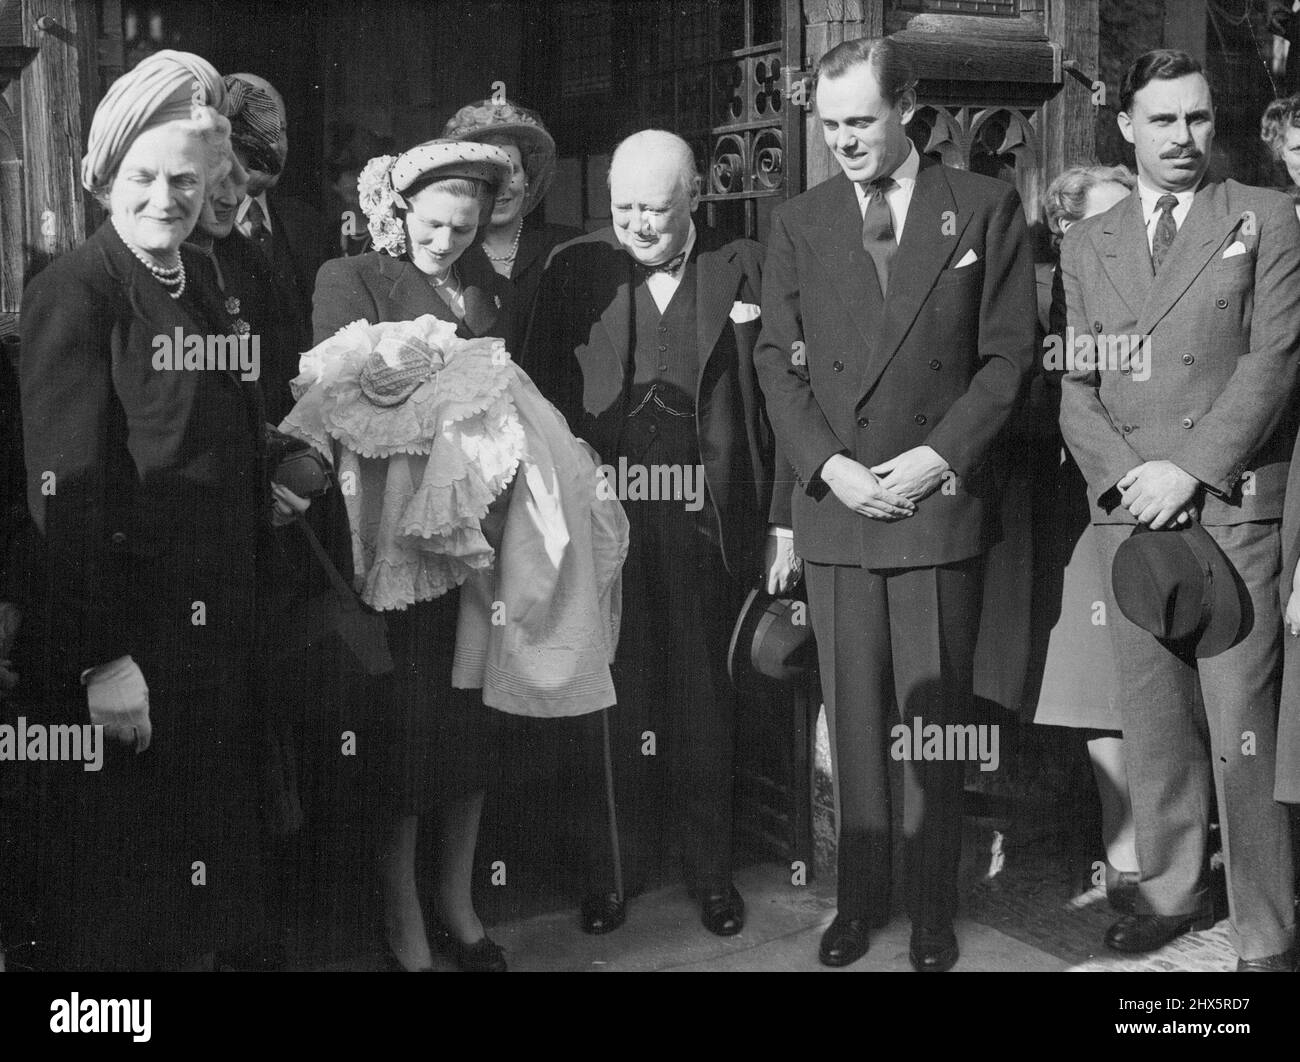 Christening of Arthur Nicholas Winston Soames, son of Captain and Mrs. Soames and the youngest grandchild of Mr. Winston Churchill at the Westerham Parish Church, Kent. Left to Right: Mrs. Churchill, Mrs. Christopher Soames, holding her infant son, Mr. Churchill and Captain Christopher Soames, father of the child, outside the Church after the ceremony. January 01, 1948. (Photo by Sport & General Press Agency, Limited). Stock Photo